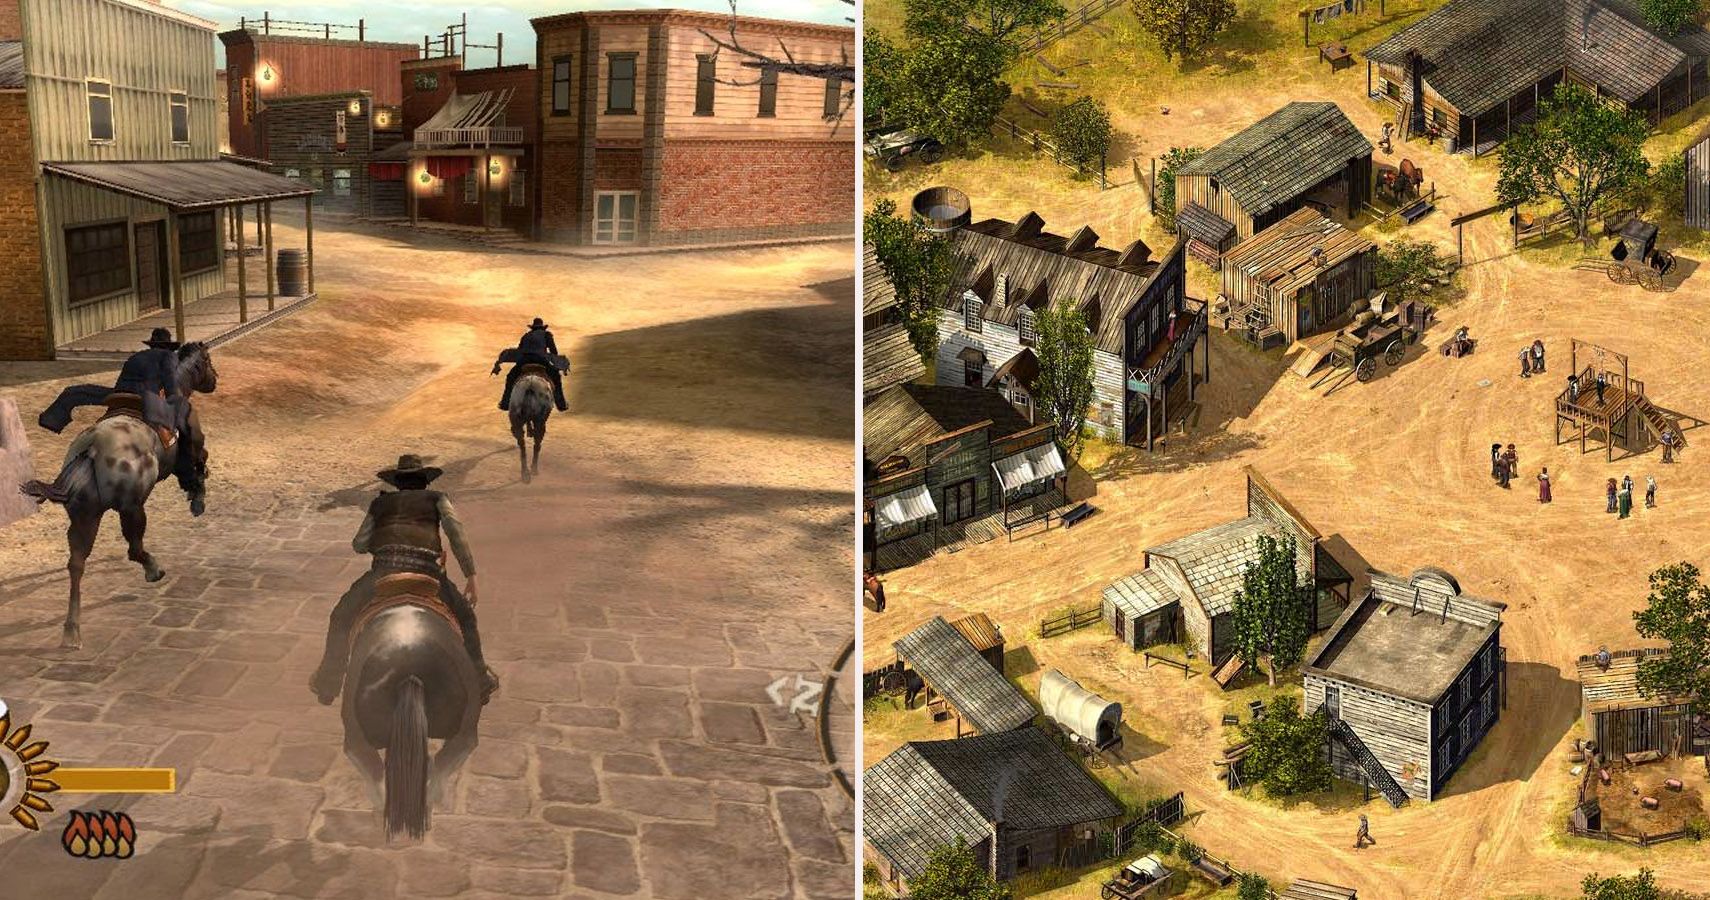 dood compressie Geleerde The 10 Best Games That Let You Play As A Cowboy